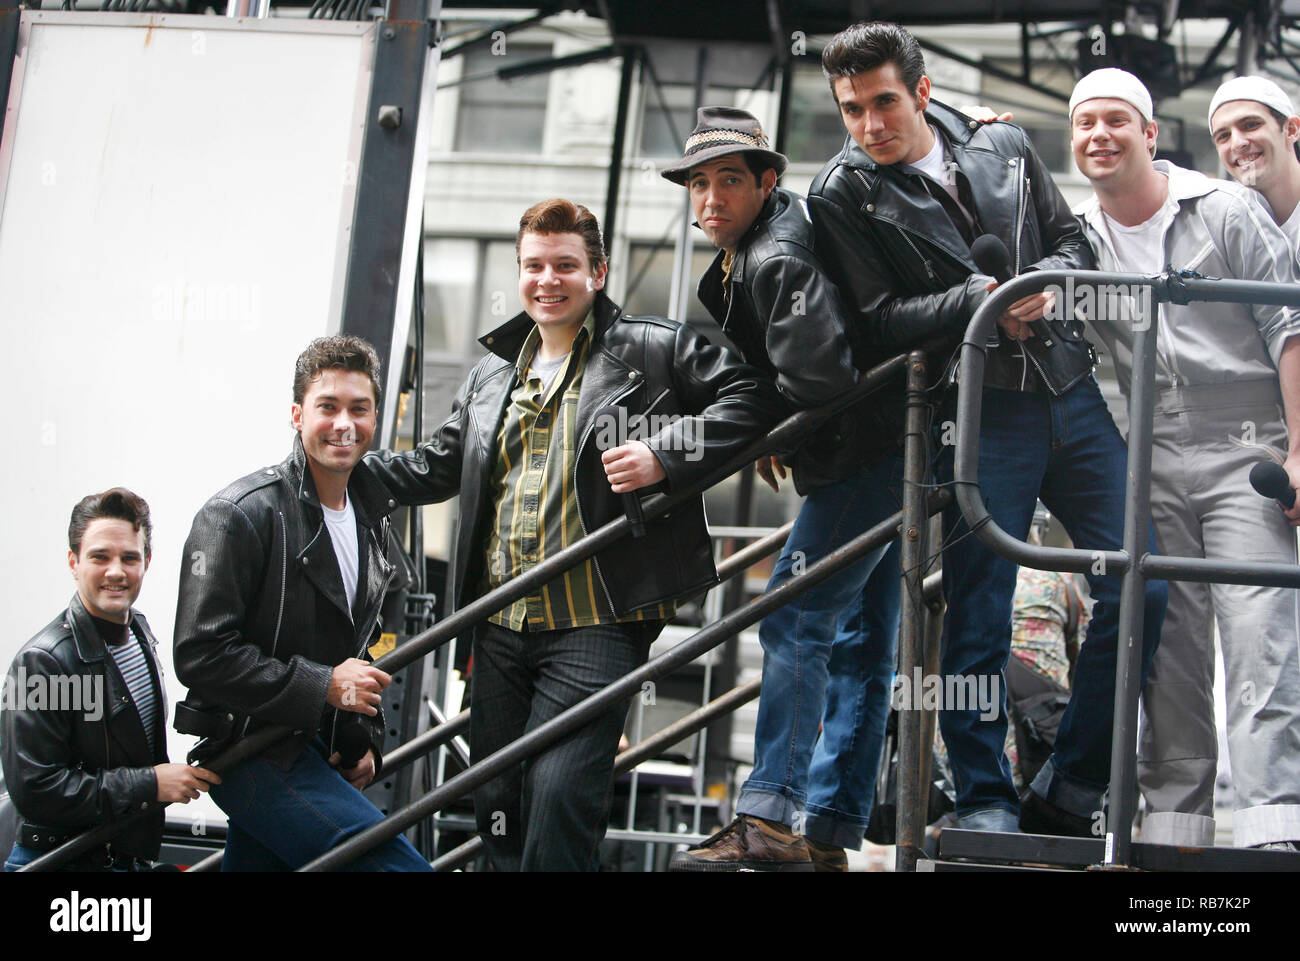 Ryan Patrick Binder & Ace Young & Keven Quillon, Jose Restrepo & Derek Keeling ( GREASE ) attending BROADWAY on BROADWAY 2008 in Times Square, New York City. September 14, 2008 Credit: Walter McBride/MediaPunch Stock Photo